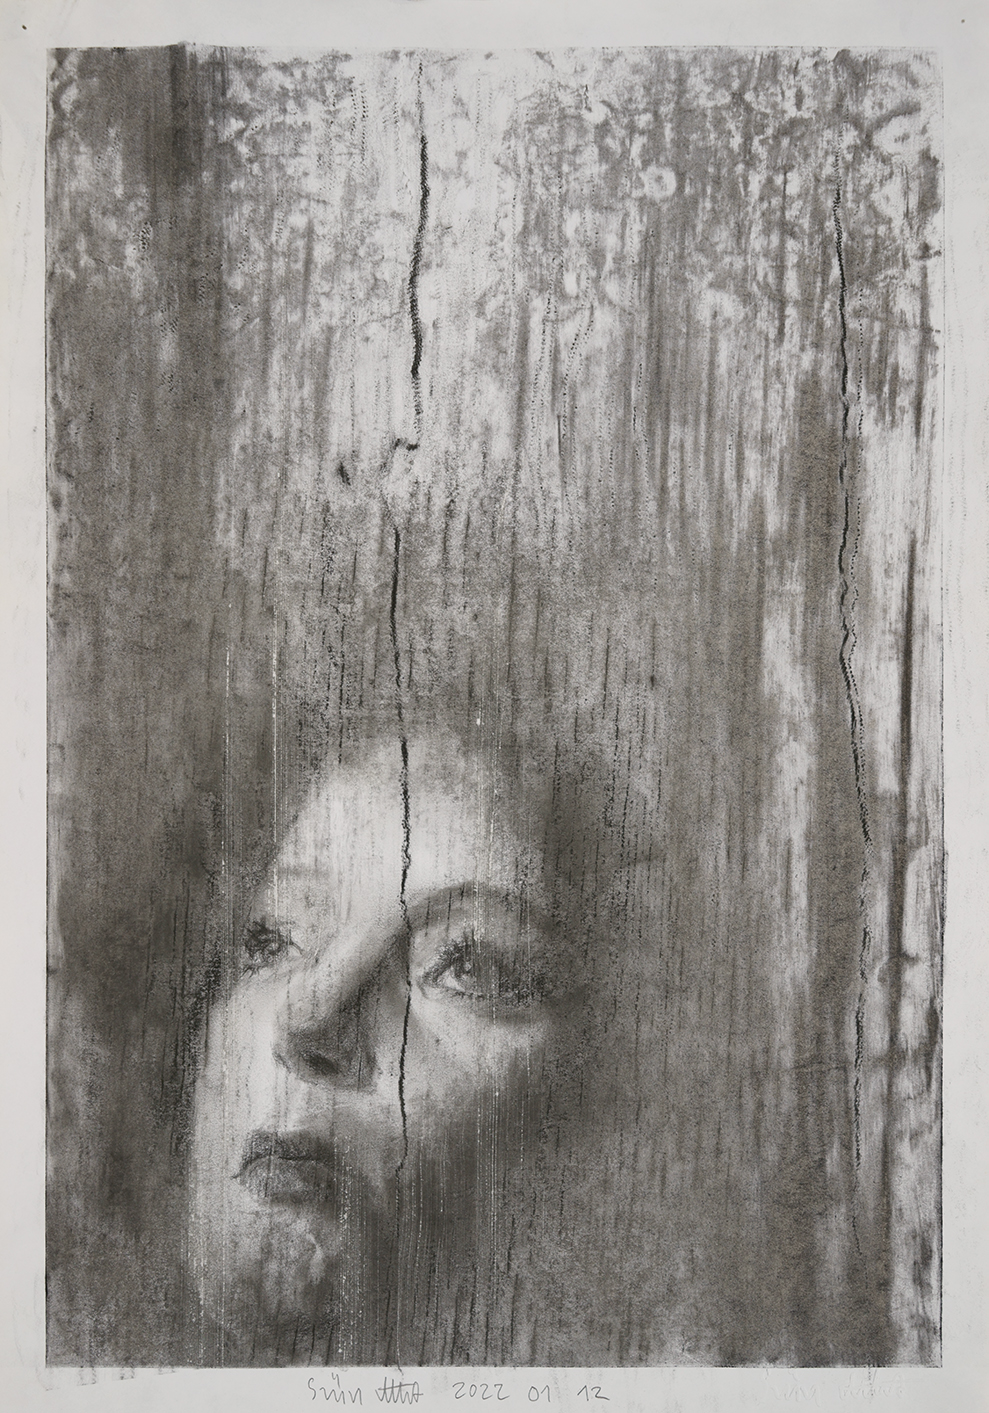 Drawing, charcoal and graphite on paper, 42x29,7cm 2022 01 12